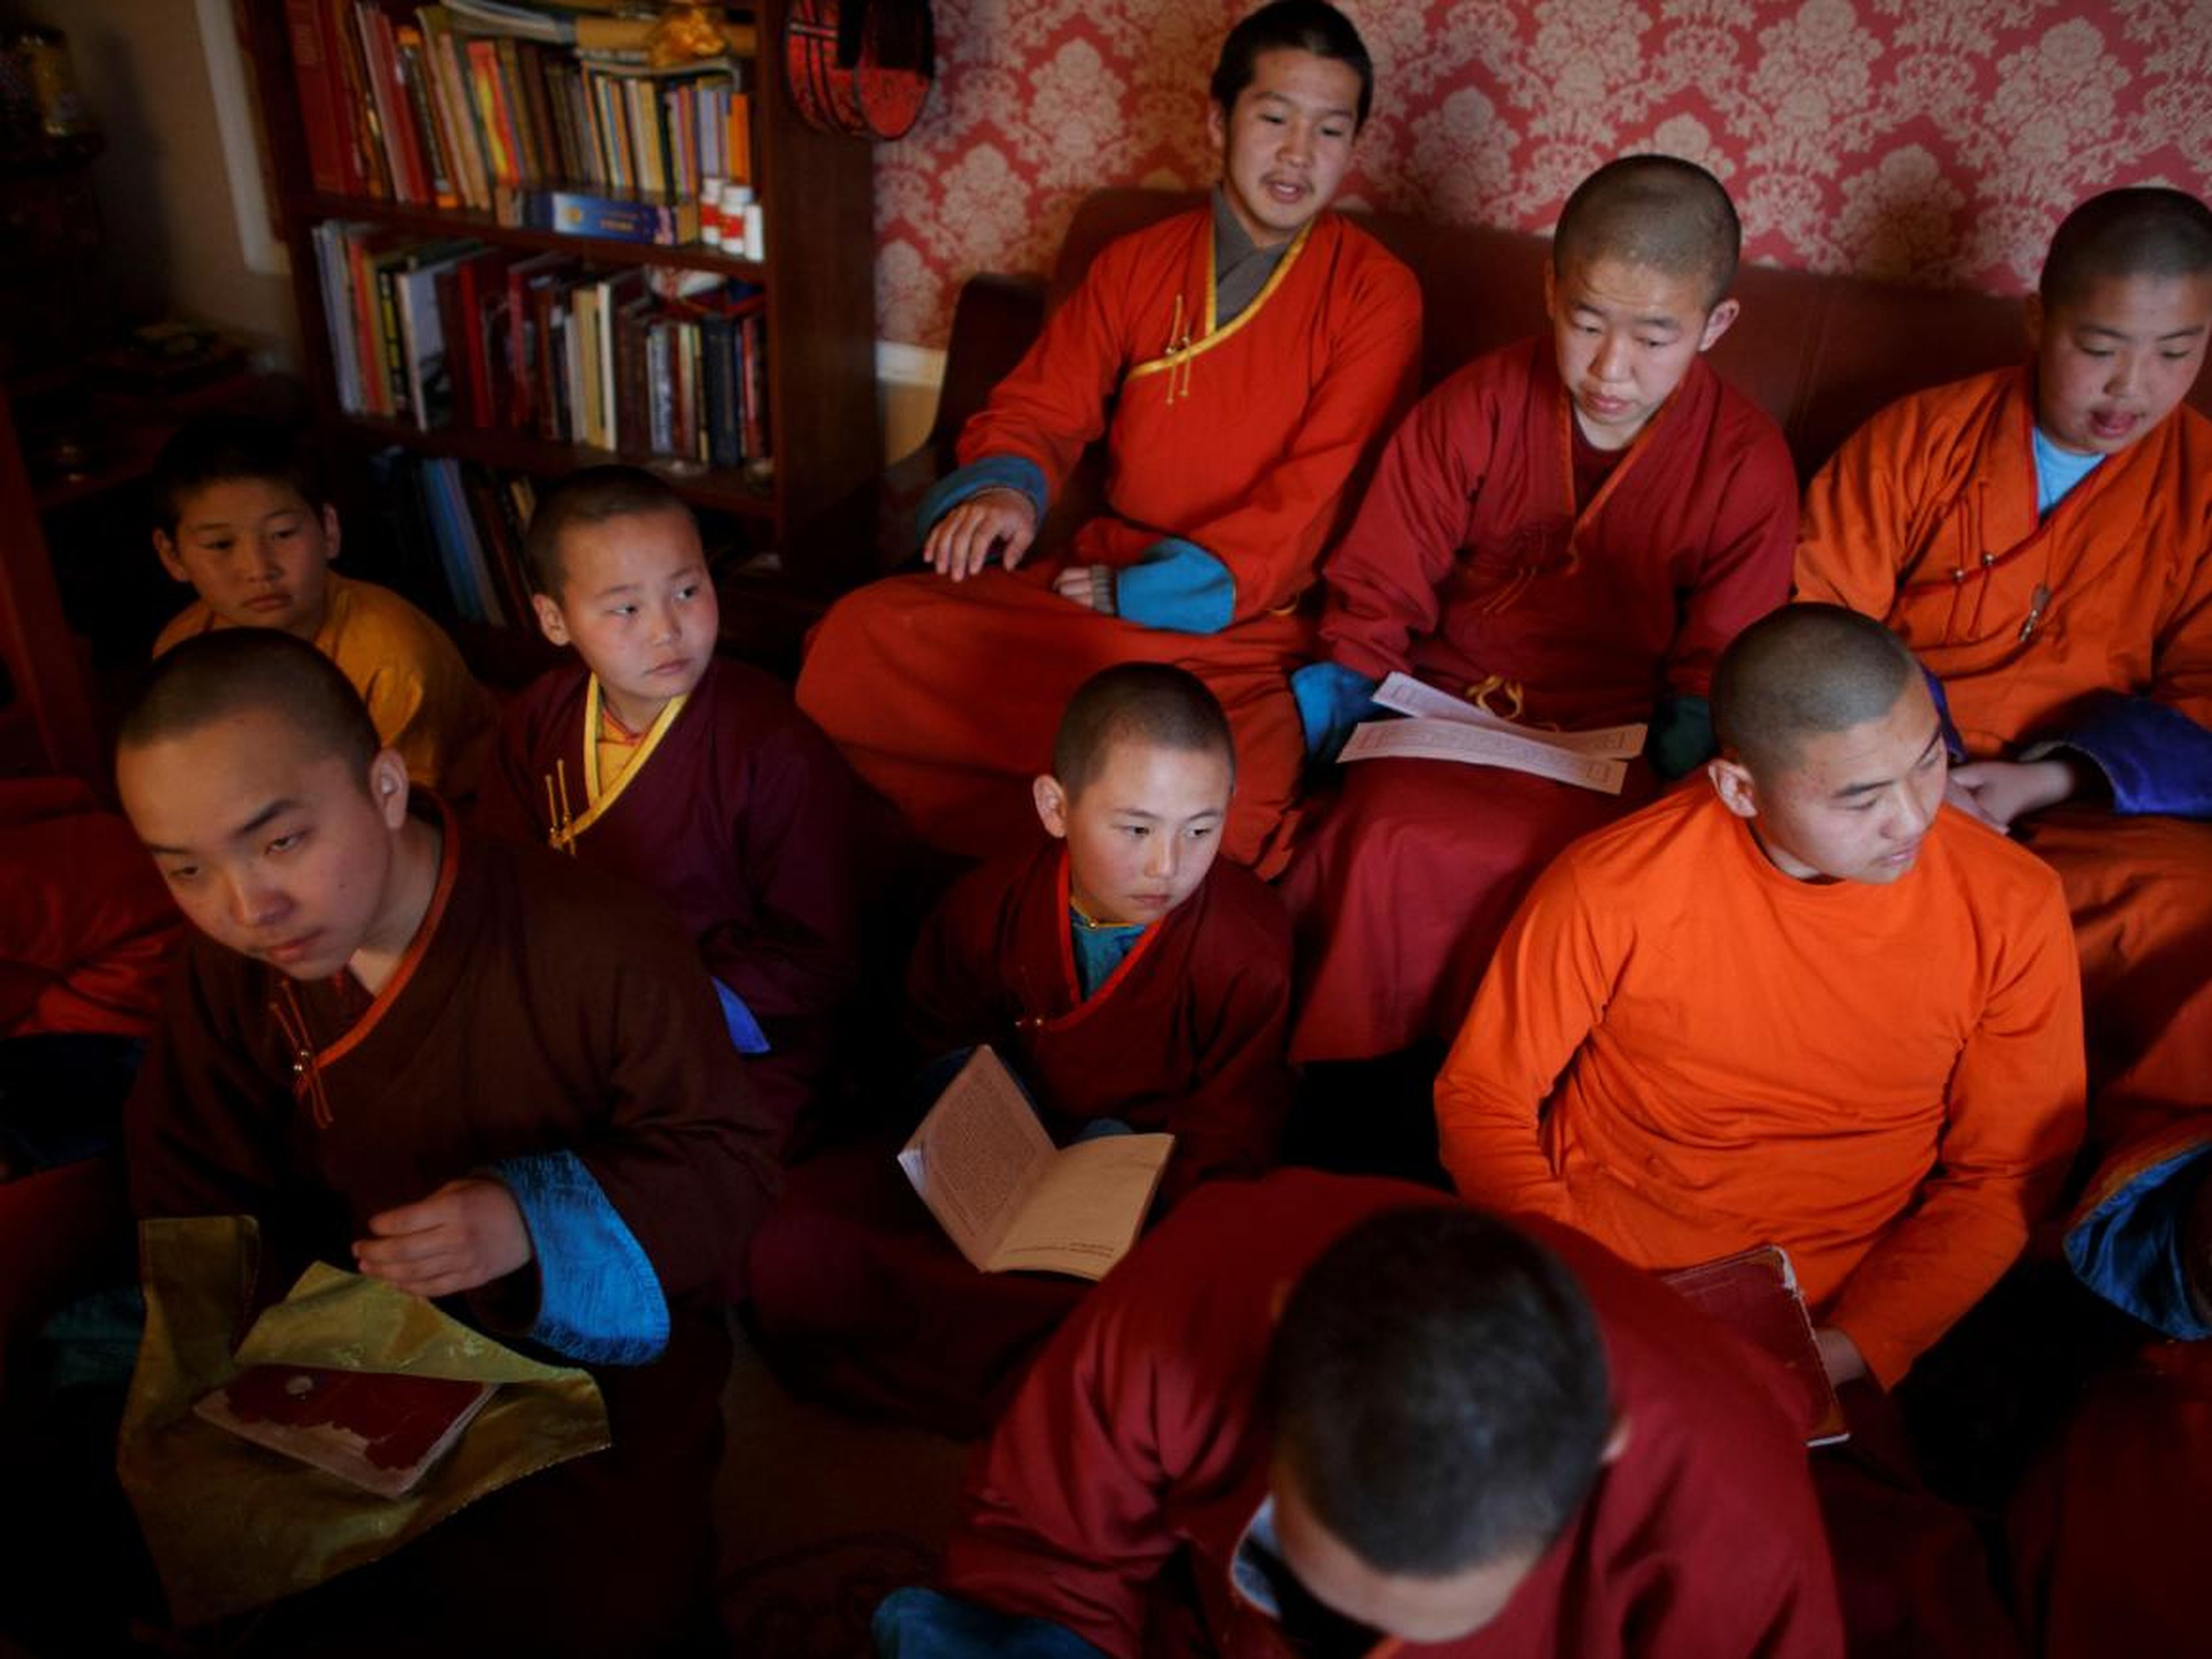 Finding young people to become students at the monastery can be an arduous task.